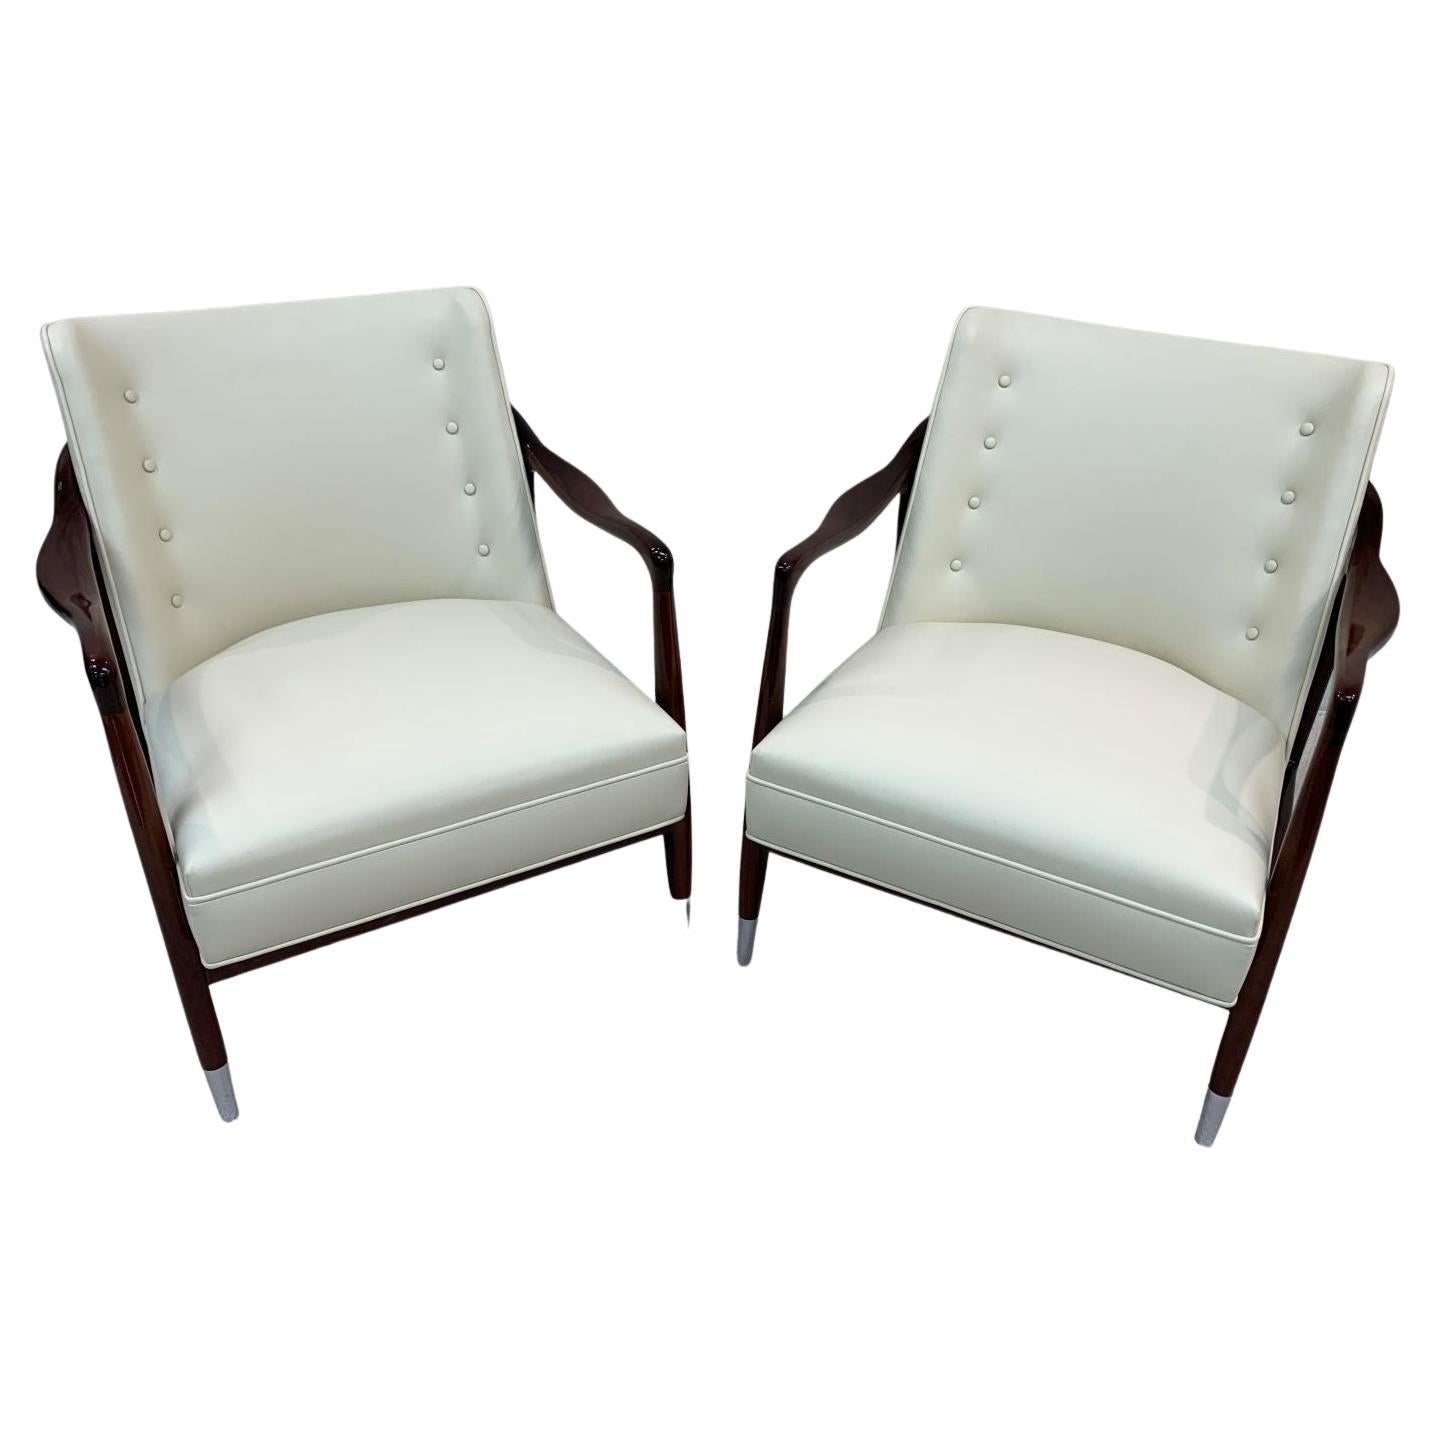 Luxurious pair of midcentury lounge chairs and ottoman in the style of Selig Furniture Company. Professionally restored in a gloss finish and perfectly complimented with soft, cream leather upholstery. Made of beautiful solid walnut .The set of